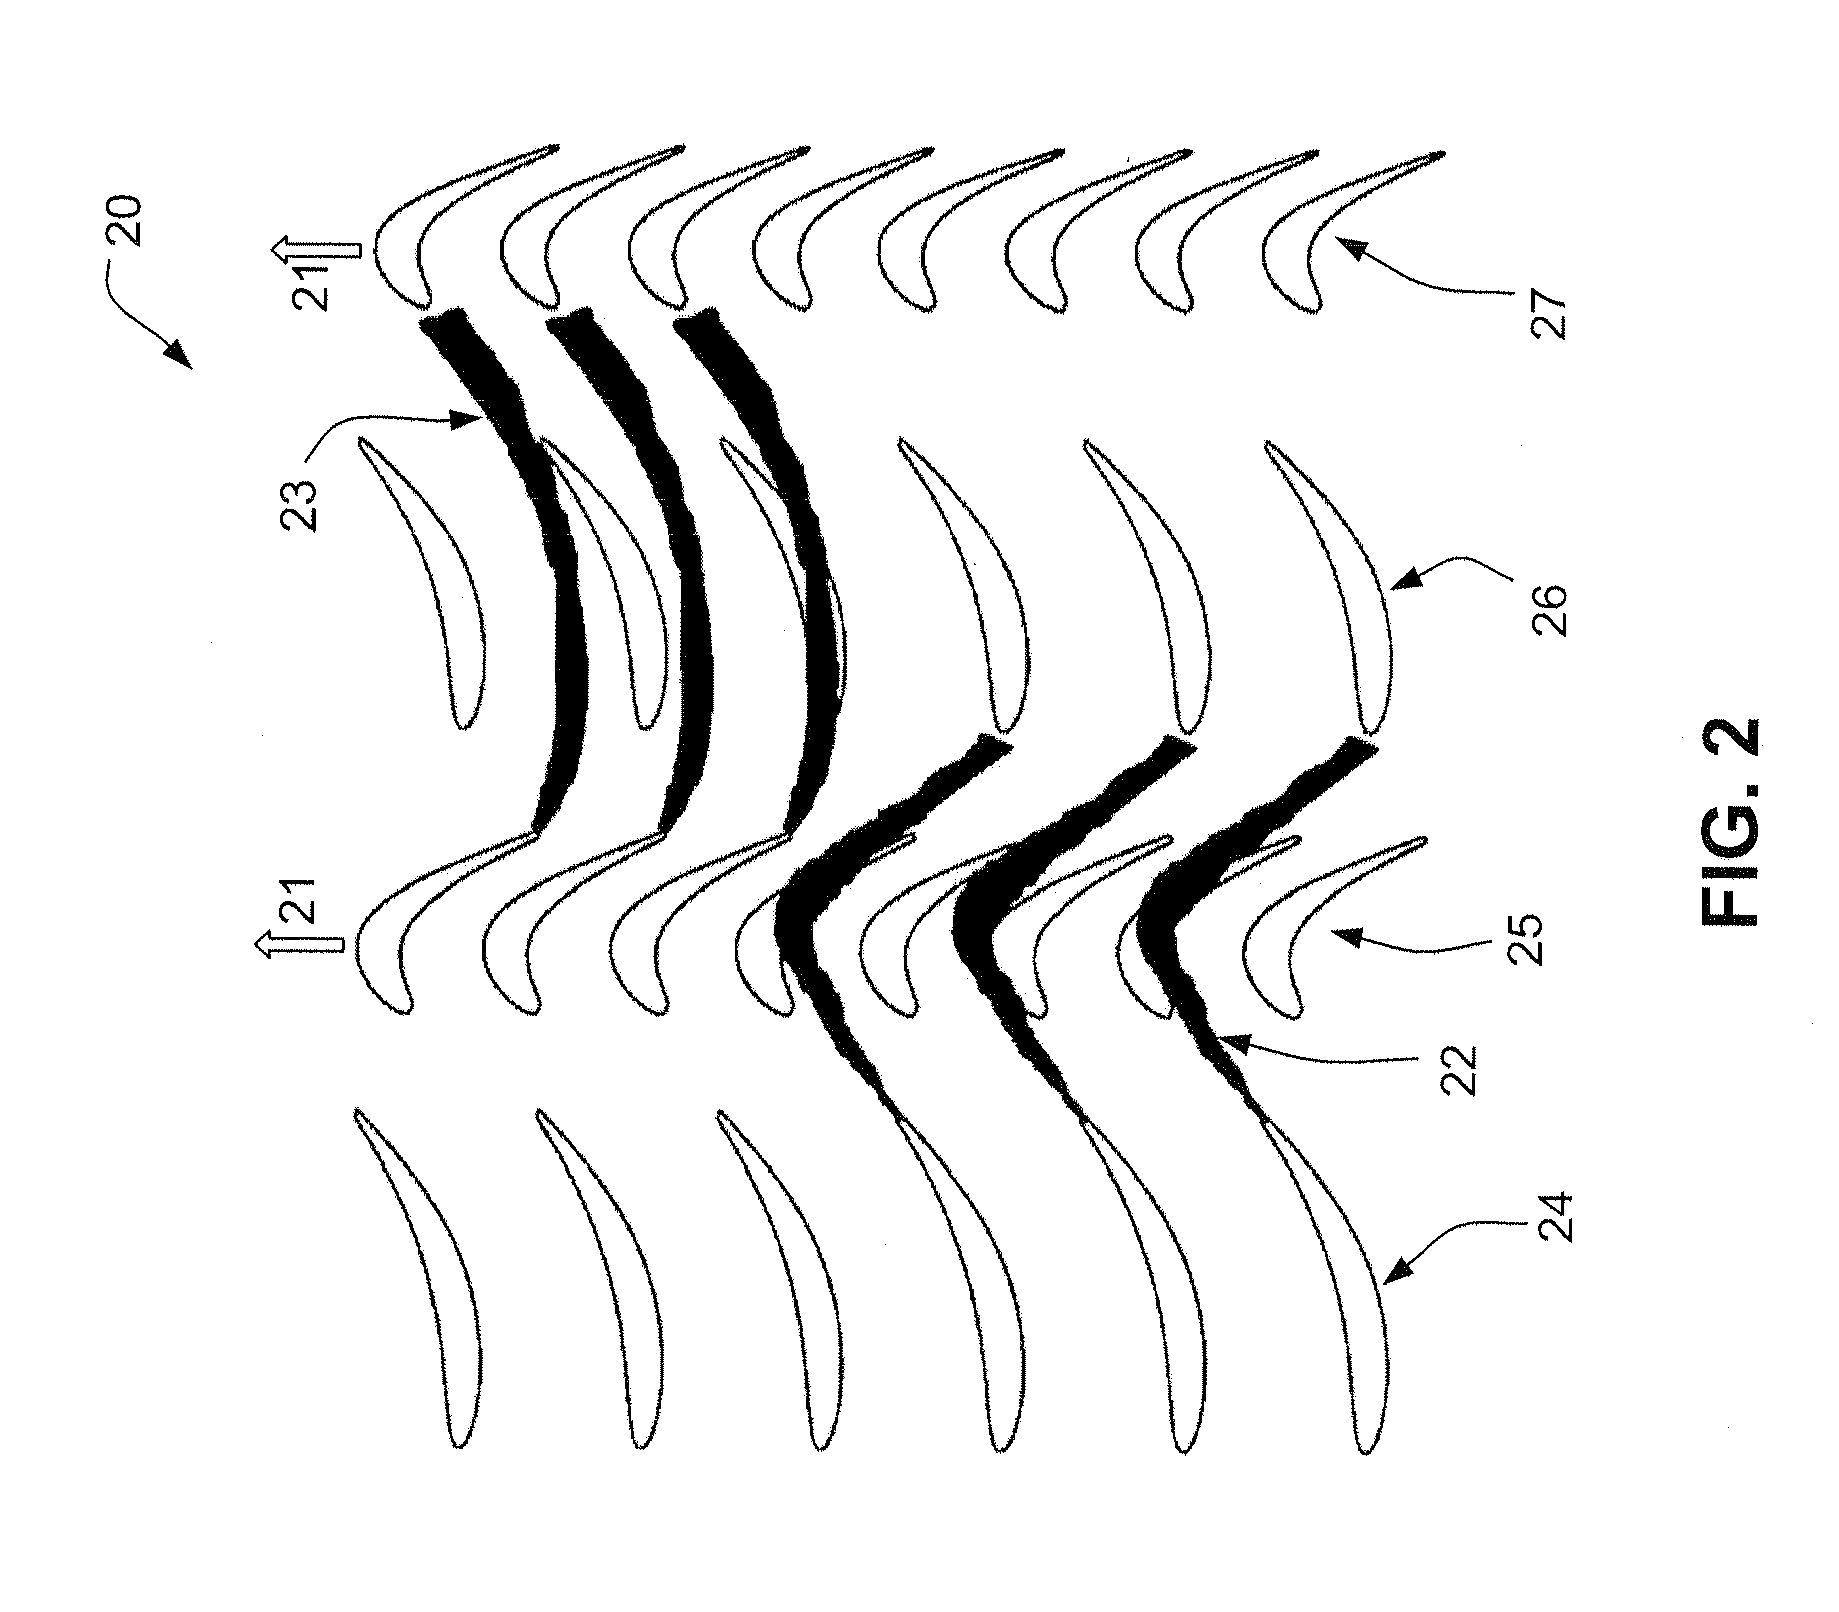 Method of clocking a turbine by reshaping the turbine's downstream airfoils